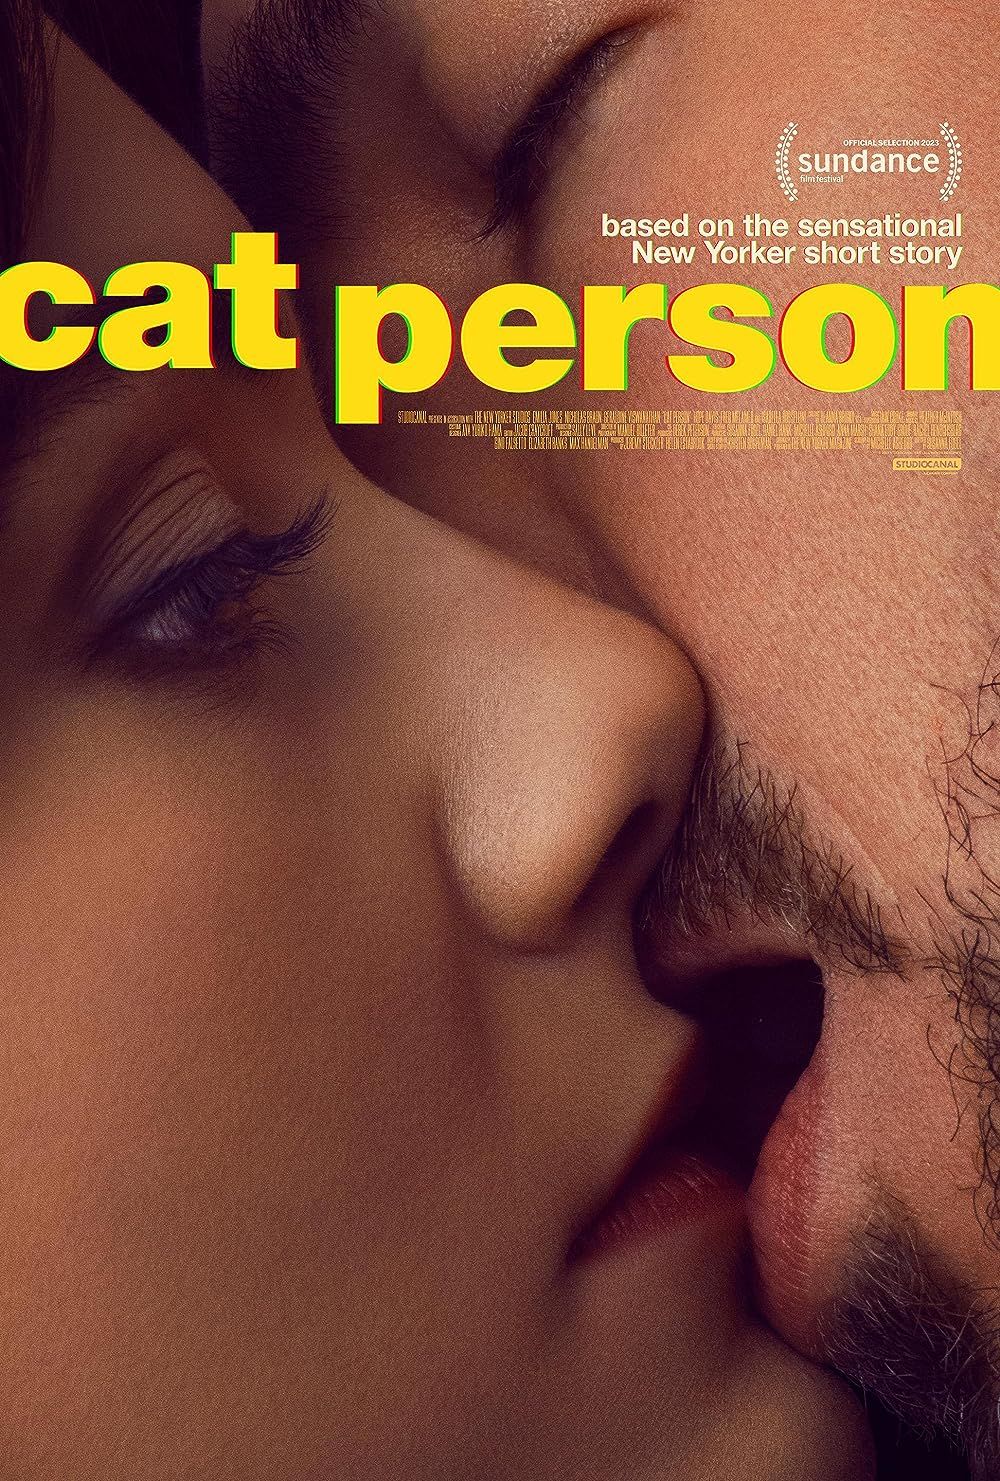 Emilia Jones and Nicholas Braun, kissing on the poster for Cat Person